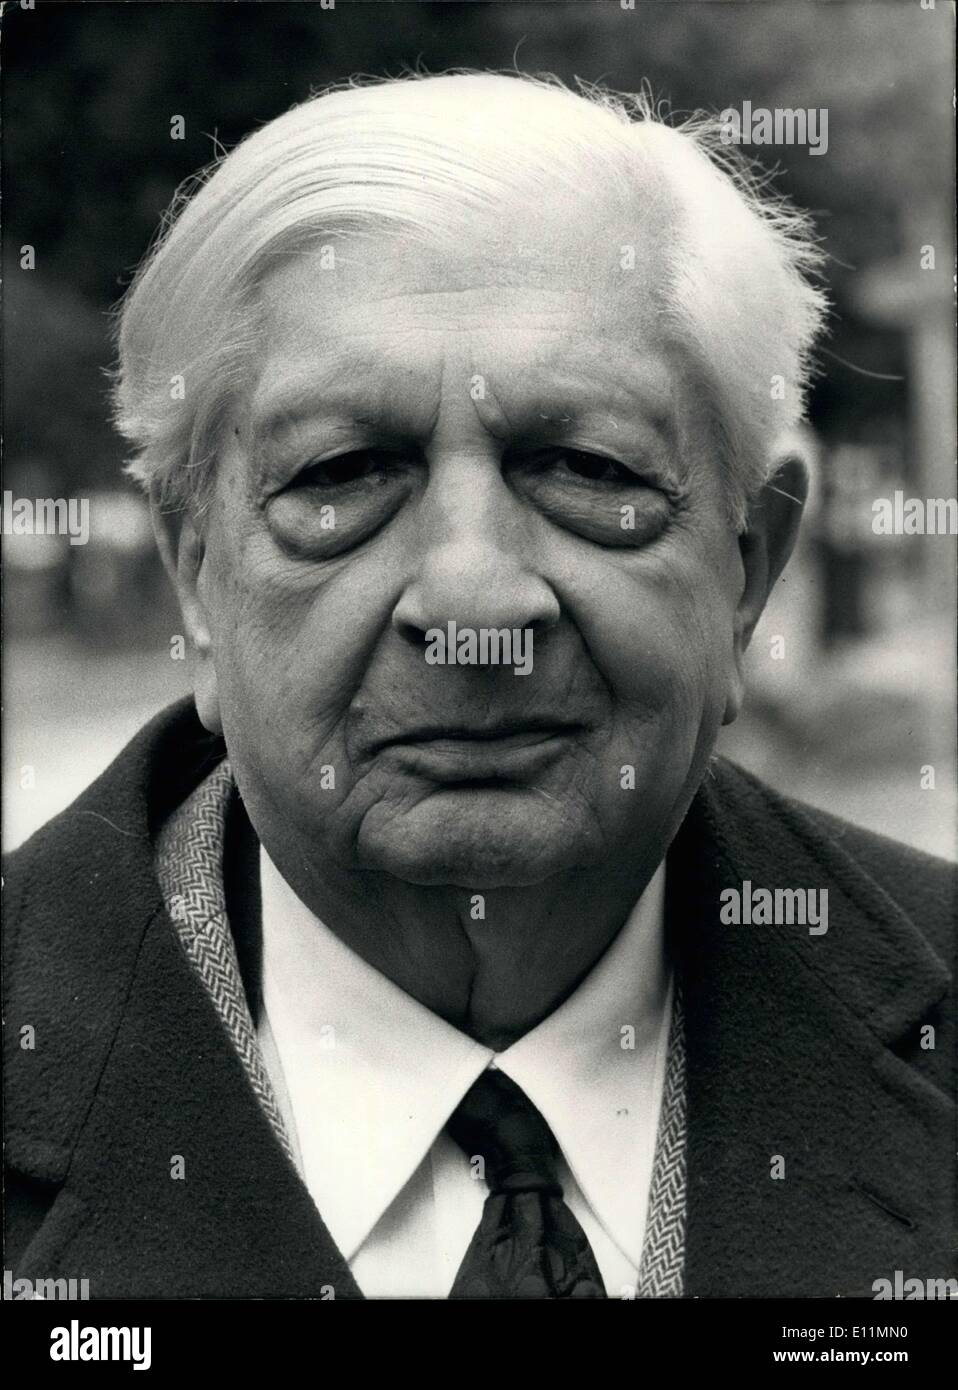 Nov. 21, 1978 - The Italian painter, Giorgio de Chirico died in Rome at the age of 90, from an infarction. He was one of the most influential and famous painters of the century. Stock Photo